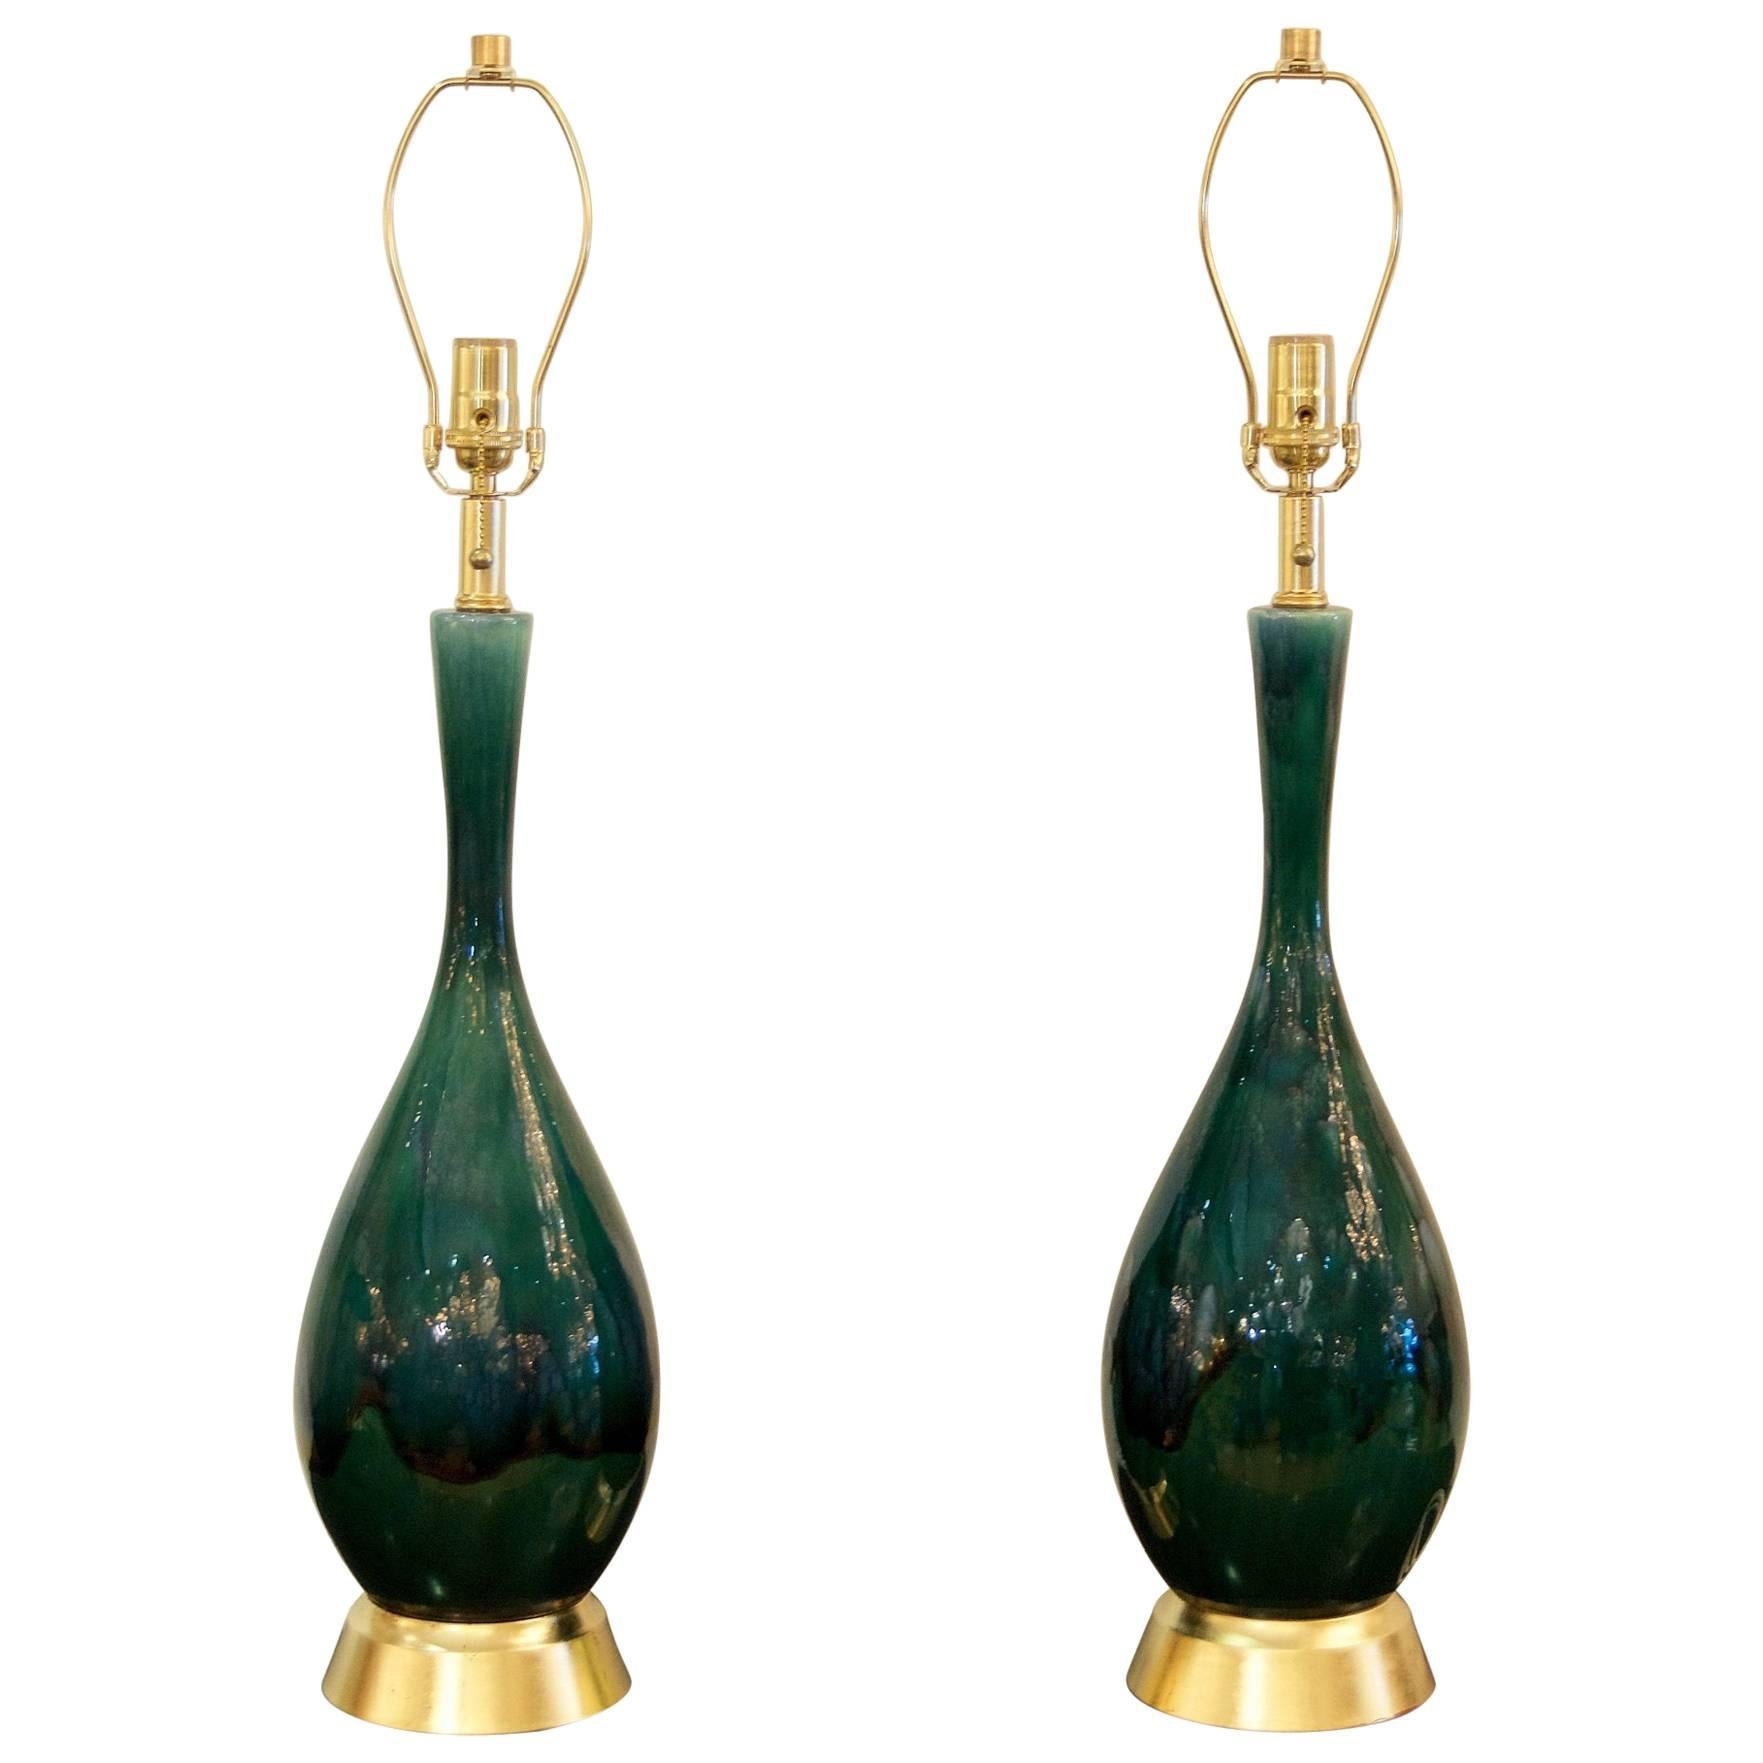 Pair of Blue-Green Drip Glaze and Gilt Royal Haeger Attributed Lamps For Sale